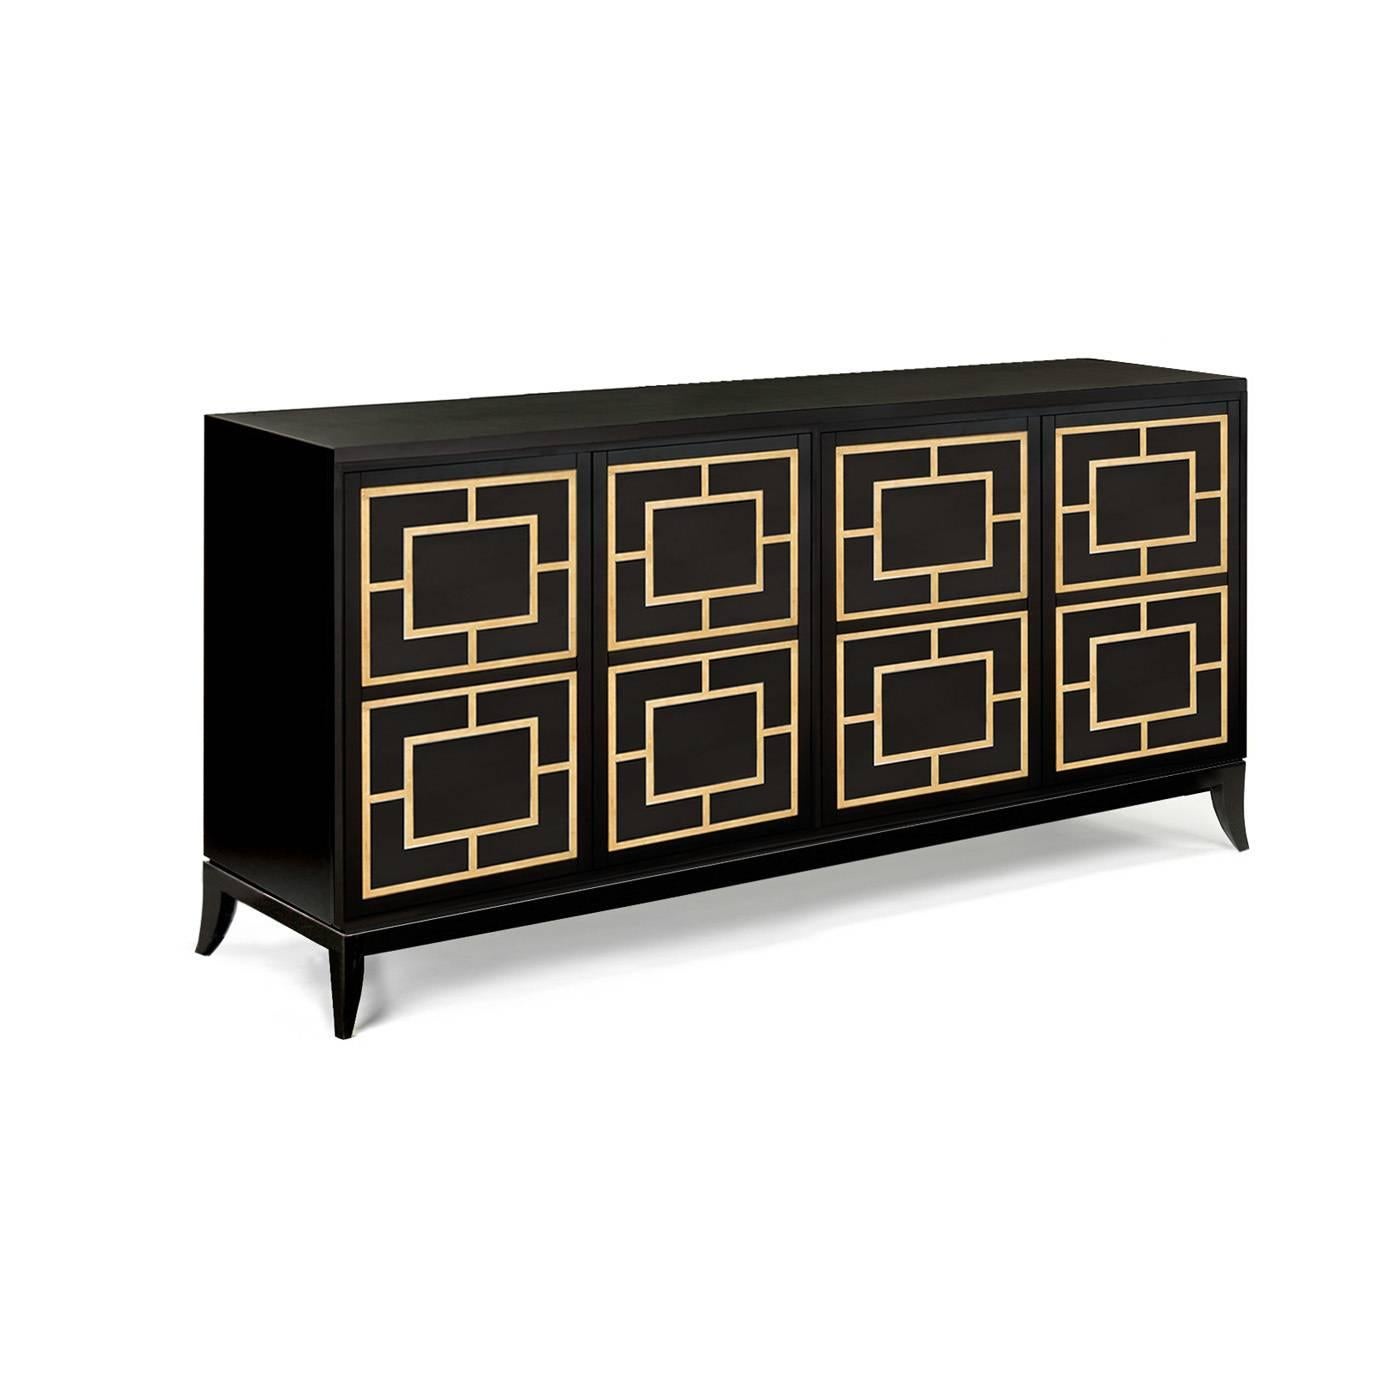 This four-door sideboard is beautifully handcrafted in Italy. The wooden doors are overlaid with a gold leaf lattice design that celebrates geometric forms. The cabinet is available in a matt mocha lacquered finish.